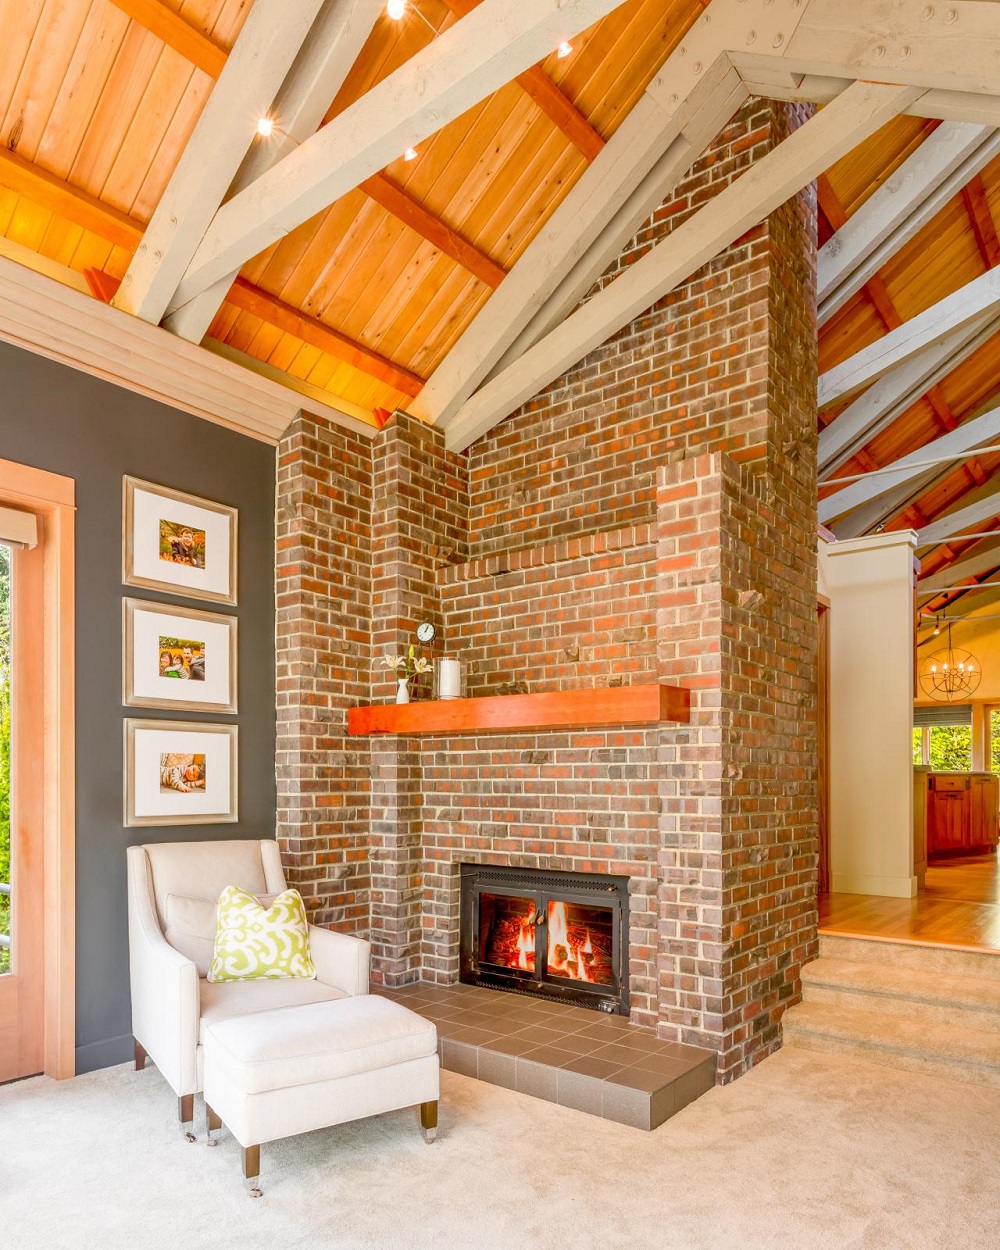 bf13-1 How to do a stunning brick fireplace makeover